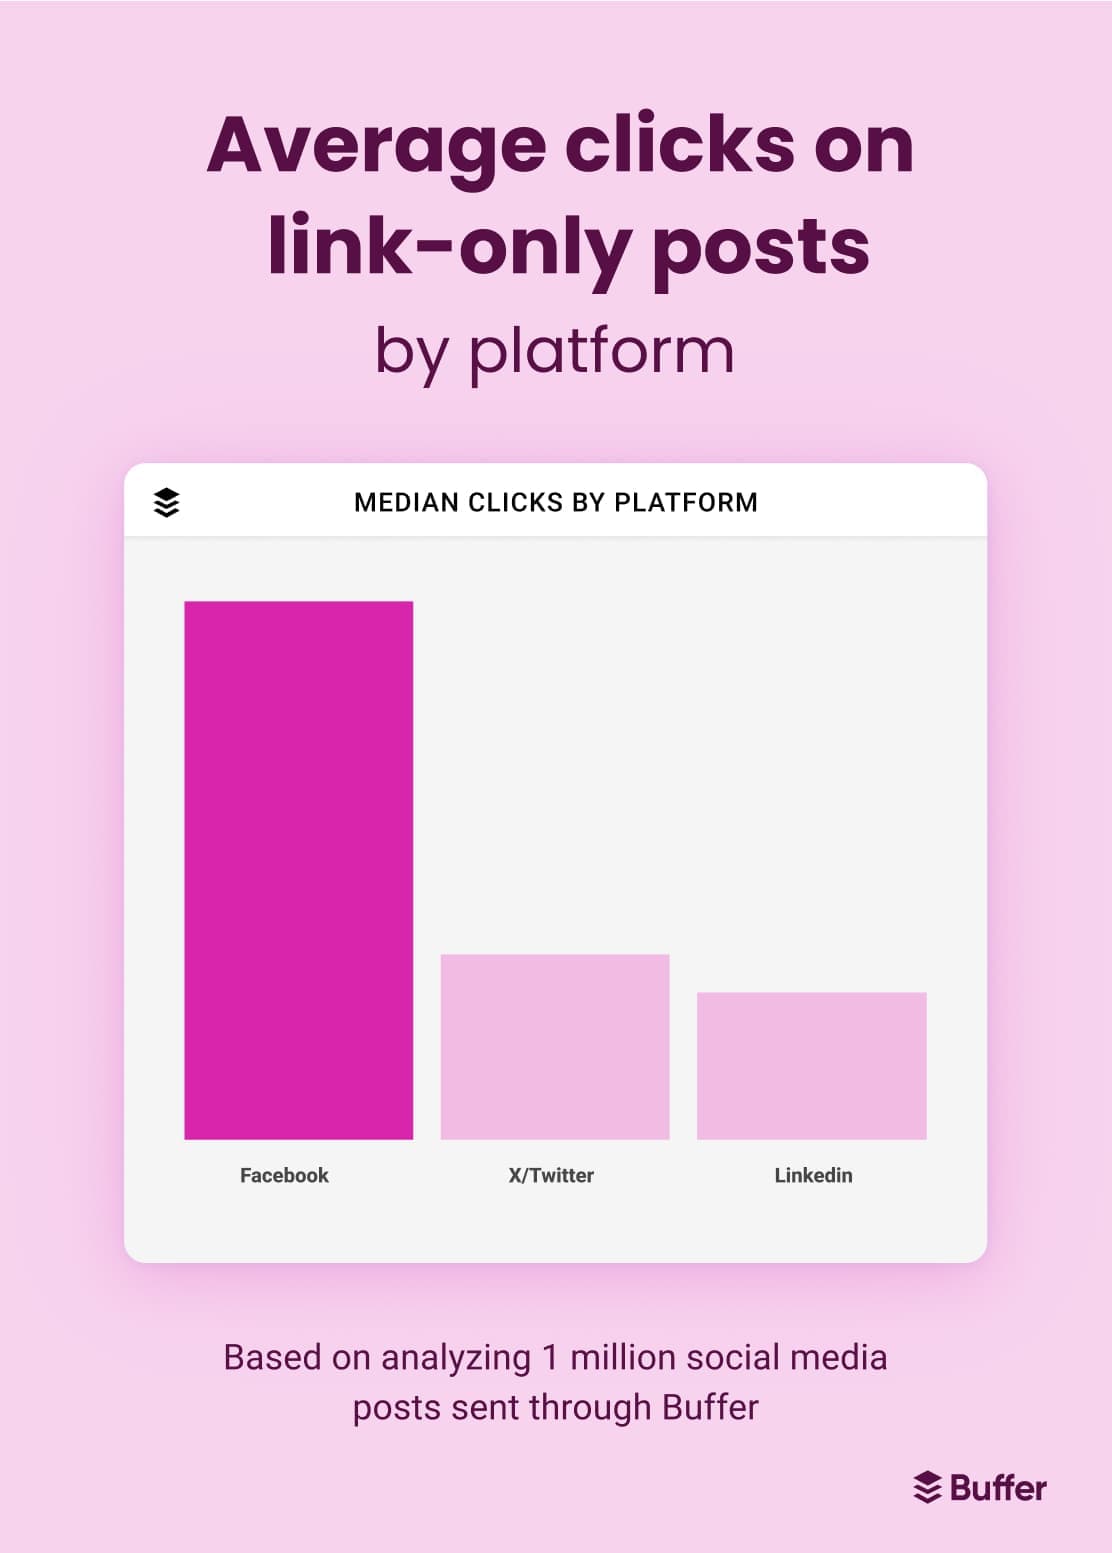 Bar chart comparing median clicks on link-only posts by platform  based on analyzing 1 million social media posts sent through Buffer displays Facebook with the highest click-through rate, followed by X/Twitter and then LinkedIn.